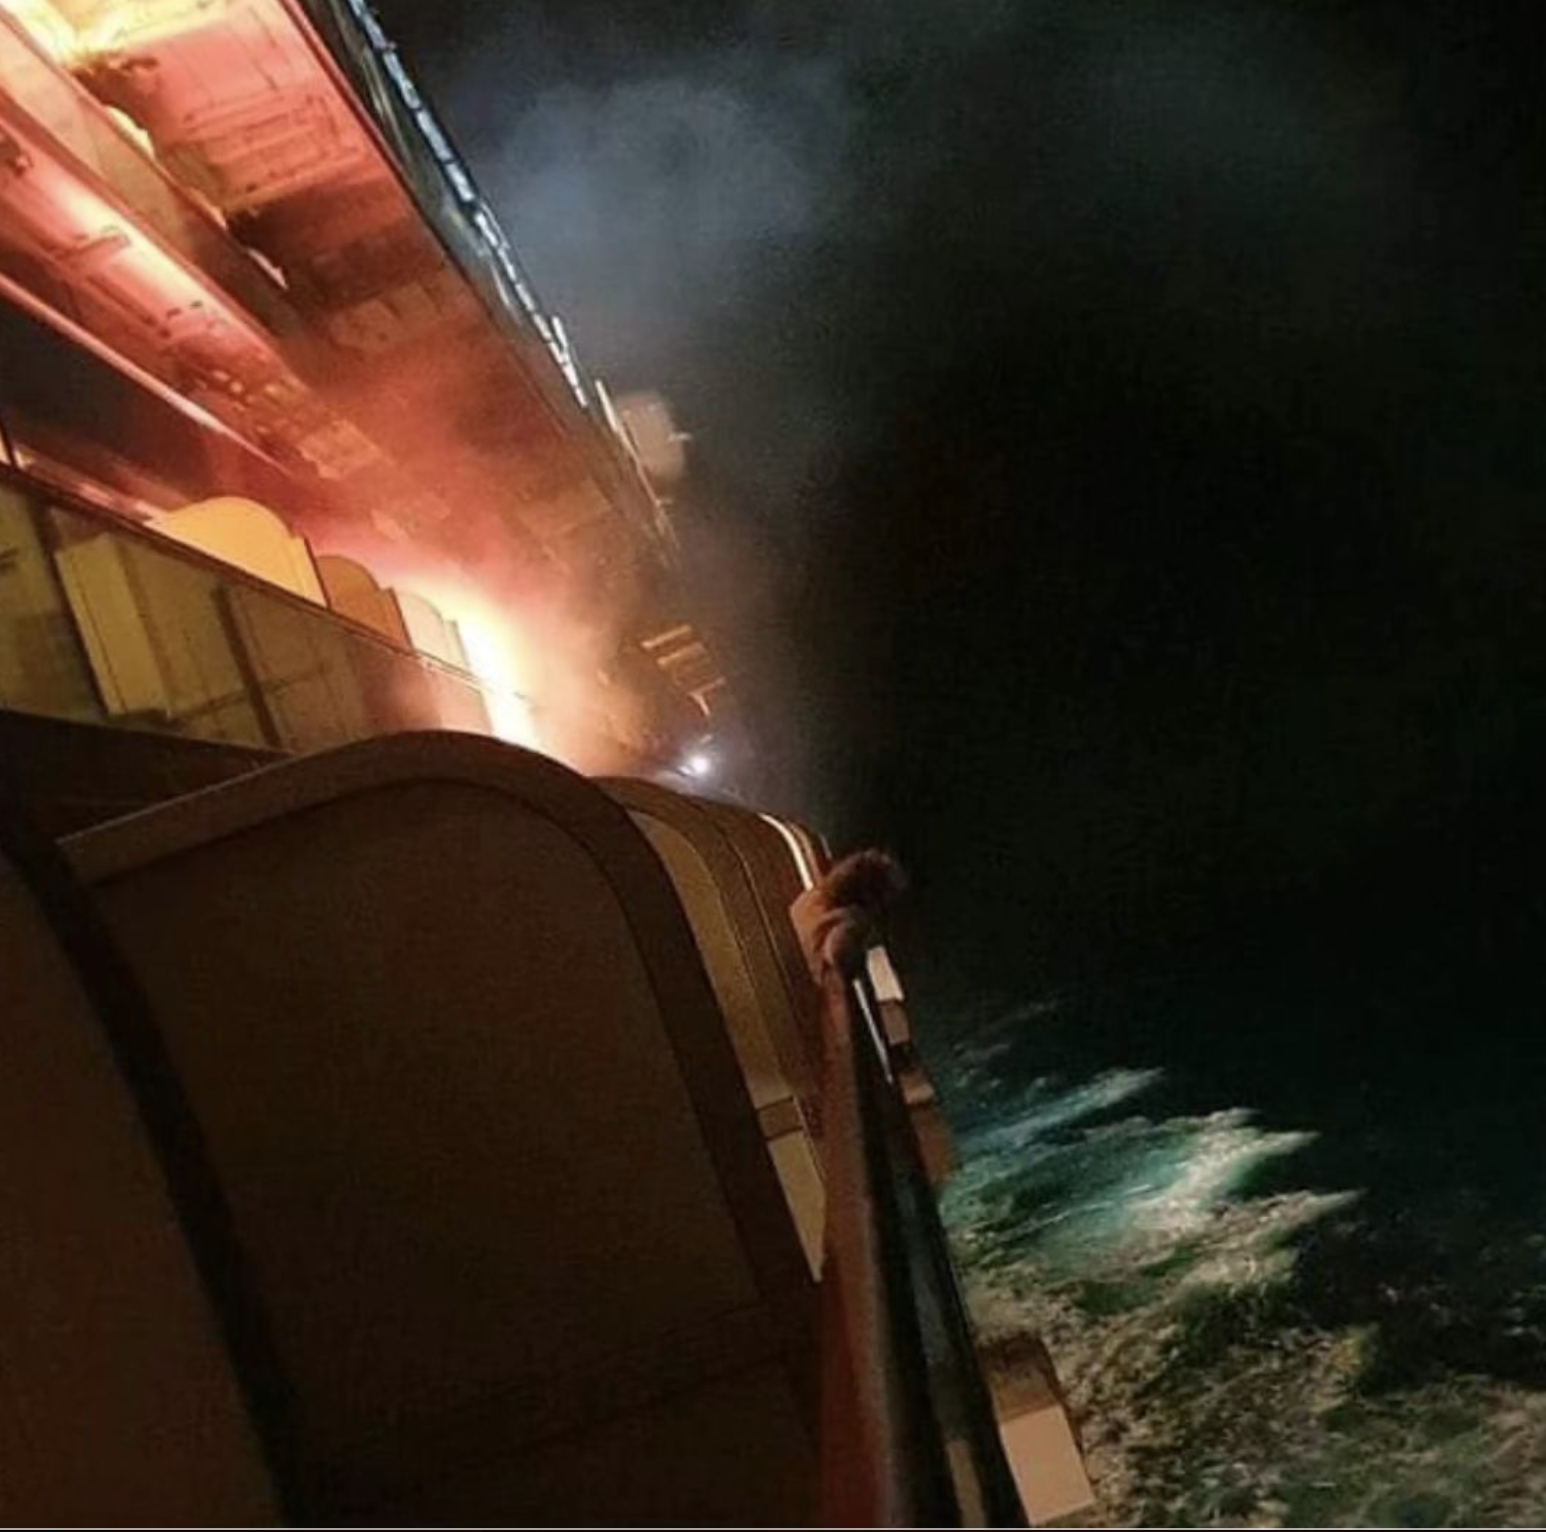 Every cruise passengers' nightmare: Pacific Adventure calls fire alert in the middle of the night